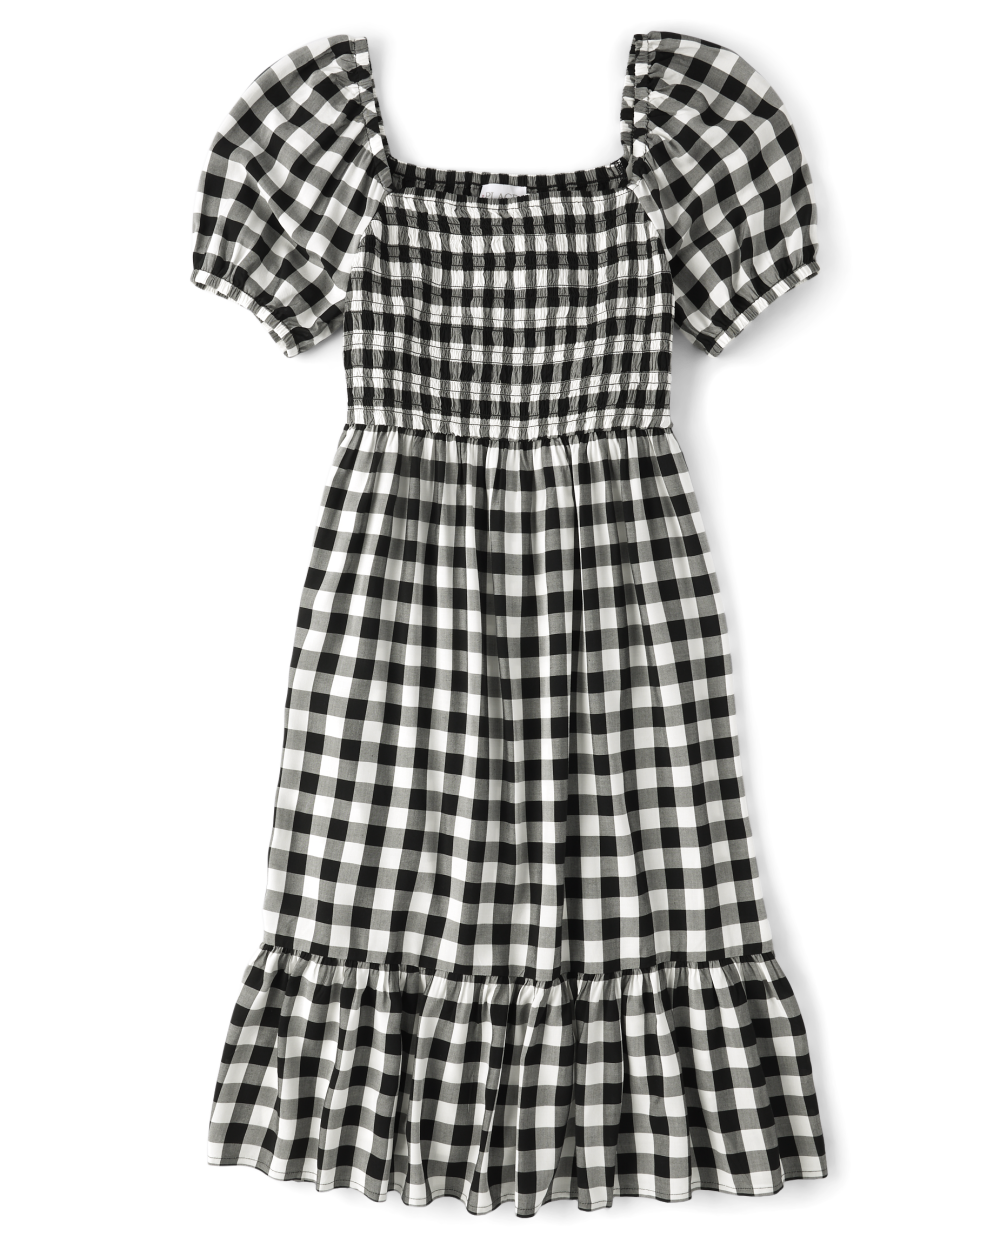 Rayon Puff Sleeves Short Sleeves Sleeves Above the Knee Checkered Gingham Print Smocked Square Neck Dress With Ruffles